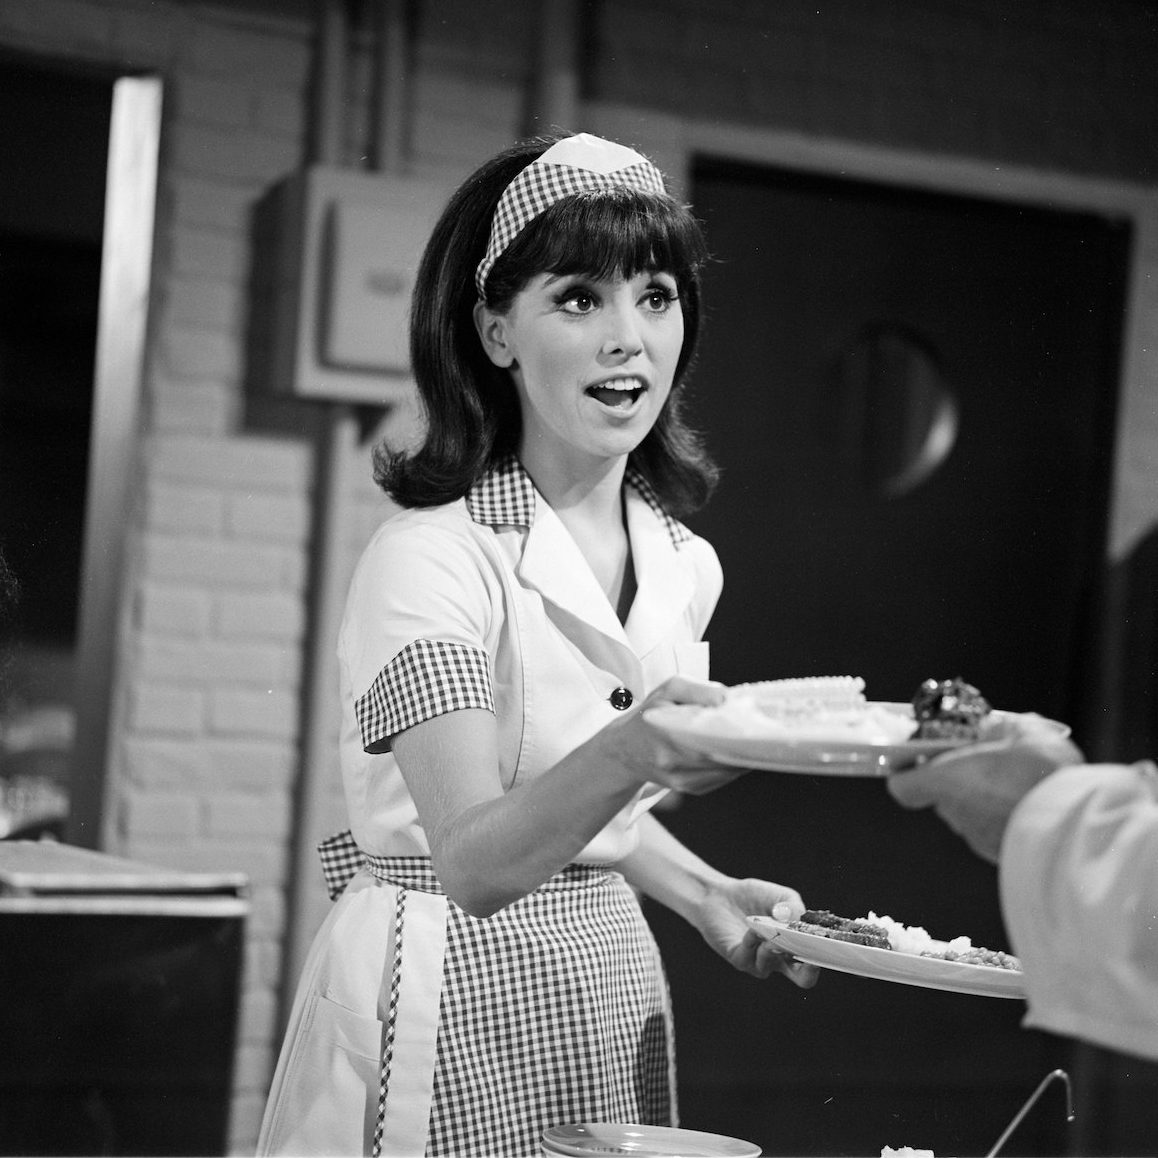 Marlo Thomas as Anne Marie in That Girl, 1966